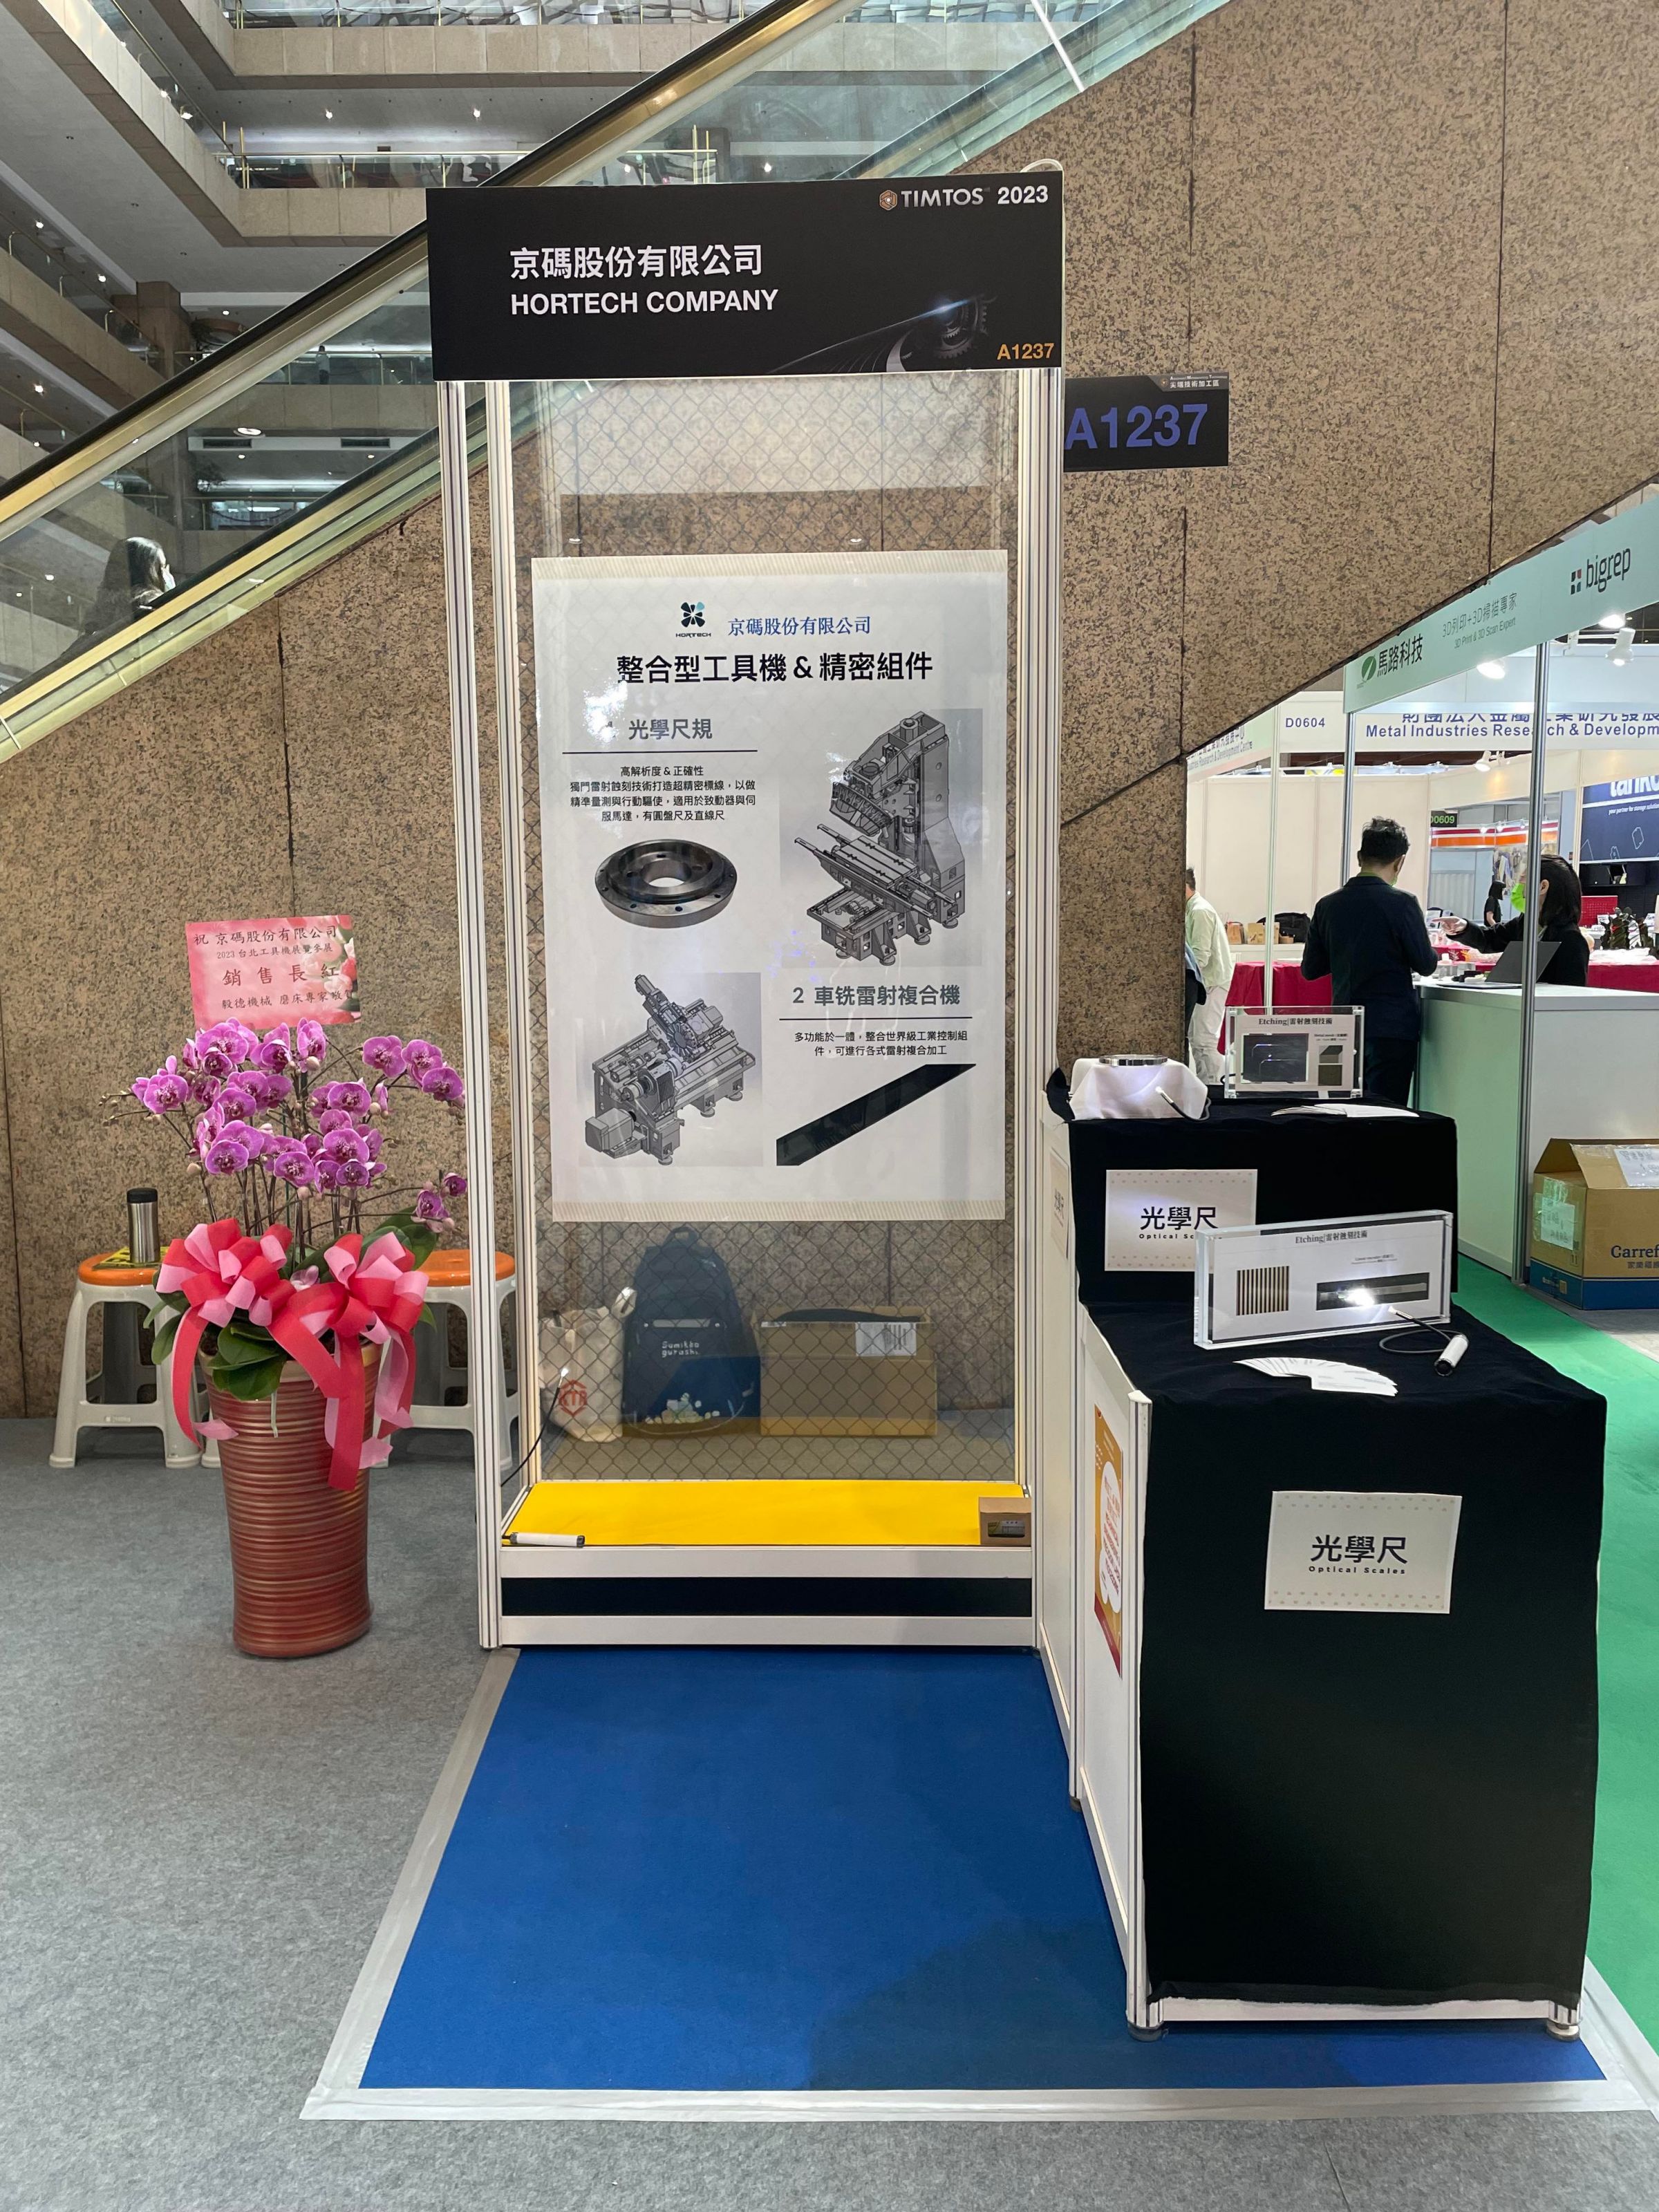 Booth: The Advanced Processing Technique Section, A1237 March 06-11, 2023  10:00-18:00
Taipei World Trade Center
No. 5 Sec. 5 Xinyi Rd. Xinyi District, Taipei City